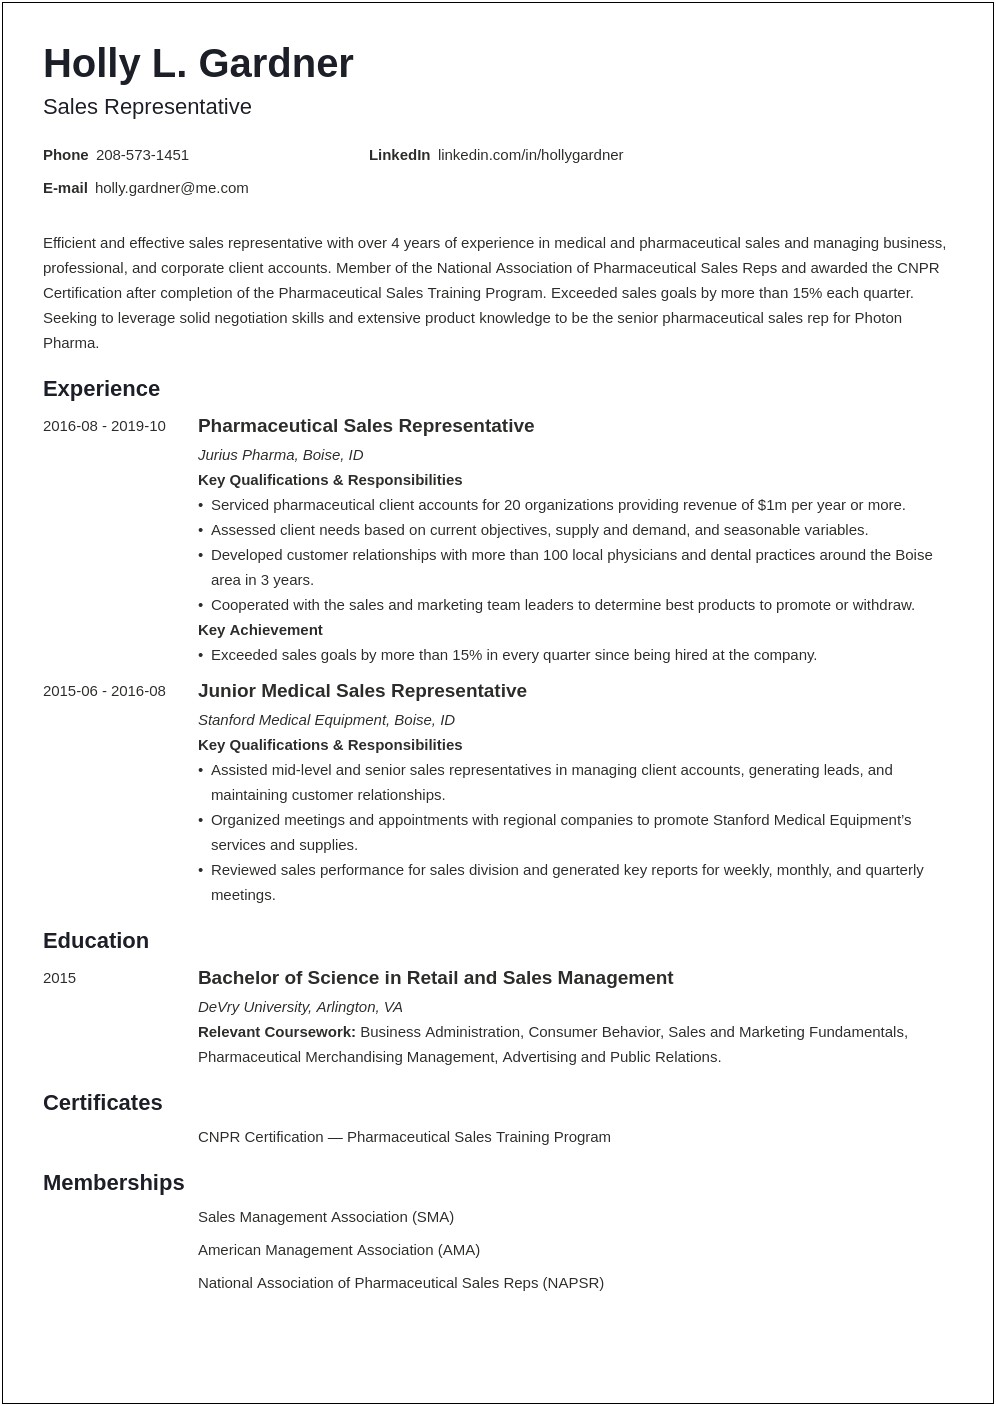 Sample Resume Format For Sales Person